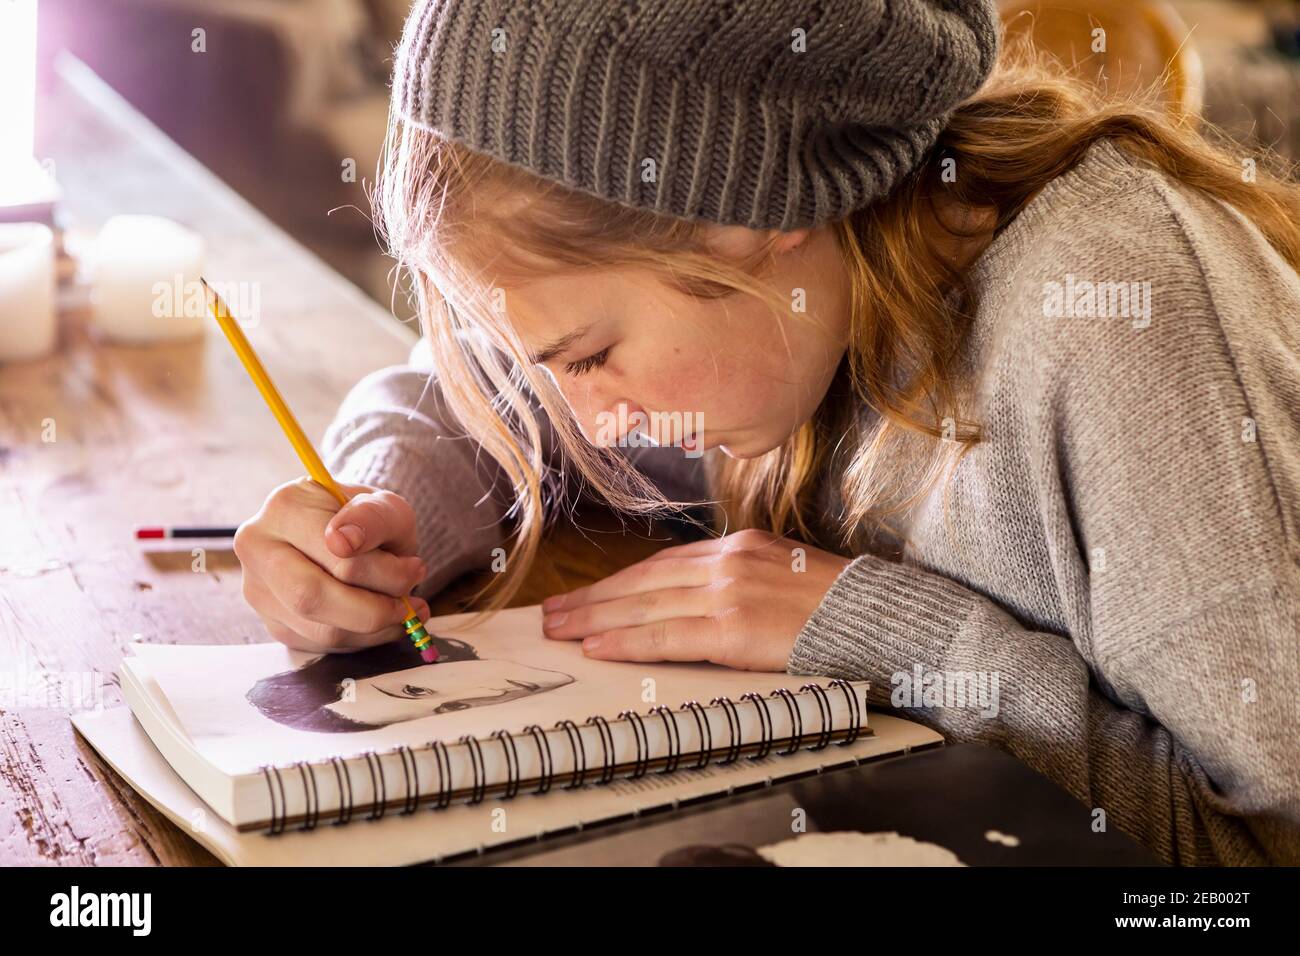 Teenage girl in a woolly hat drawing with a pencil on a sketchpad. Stock Photo